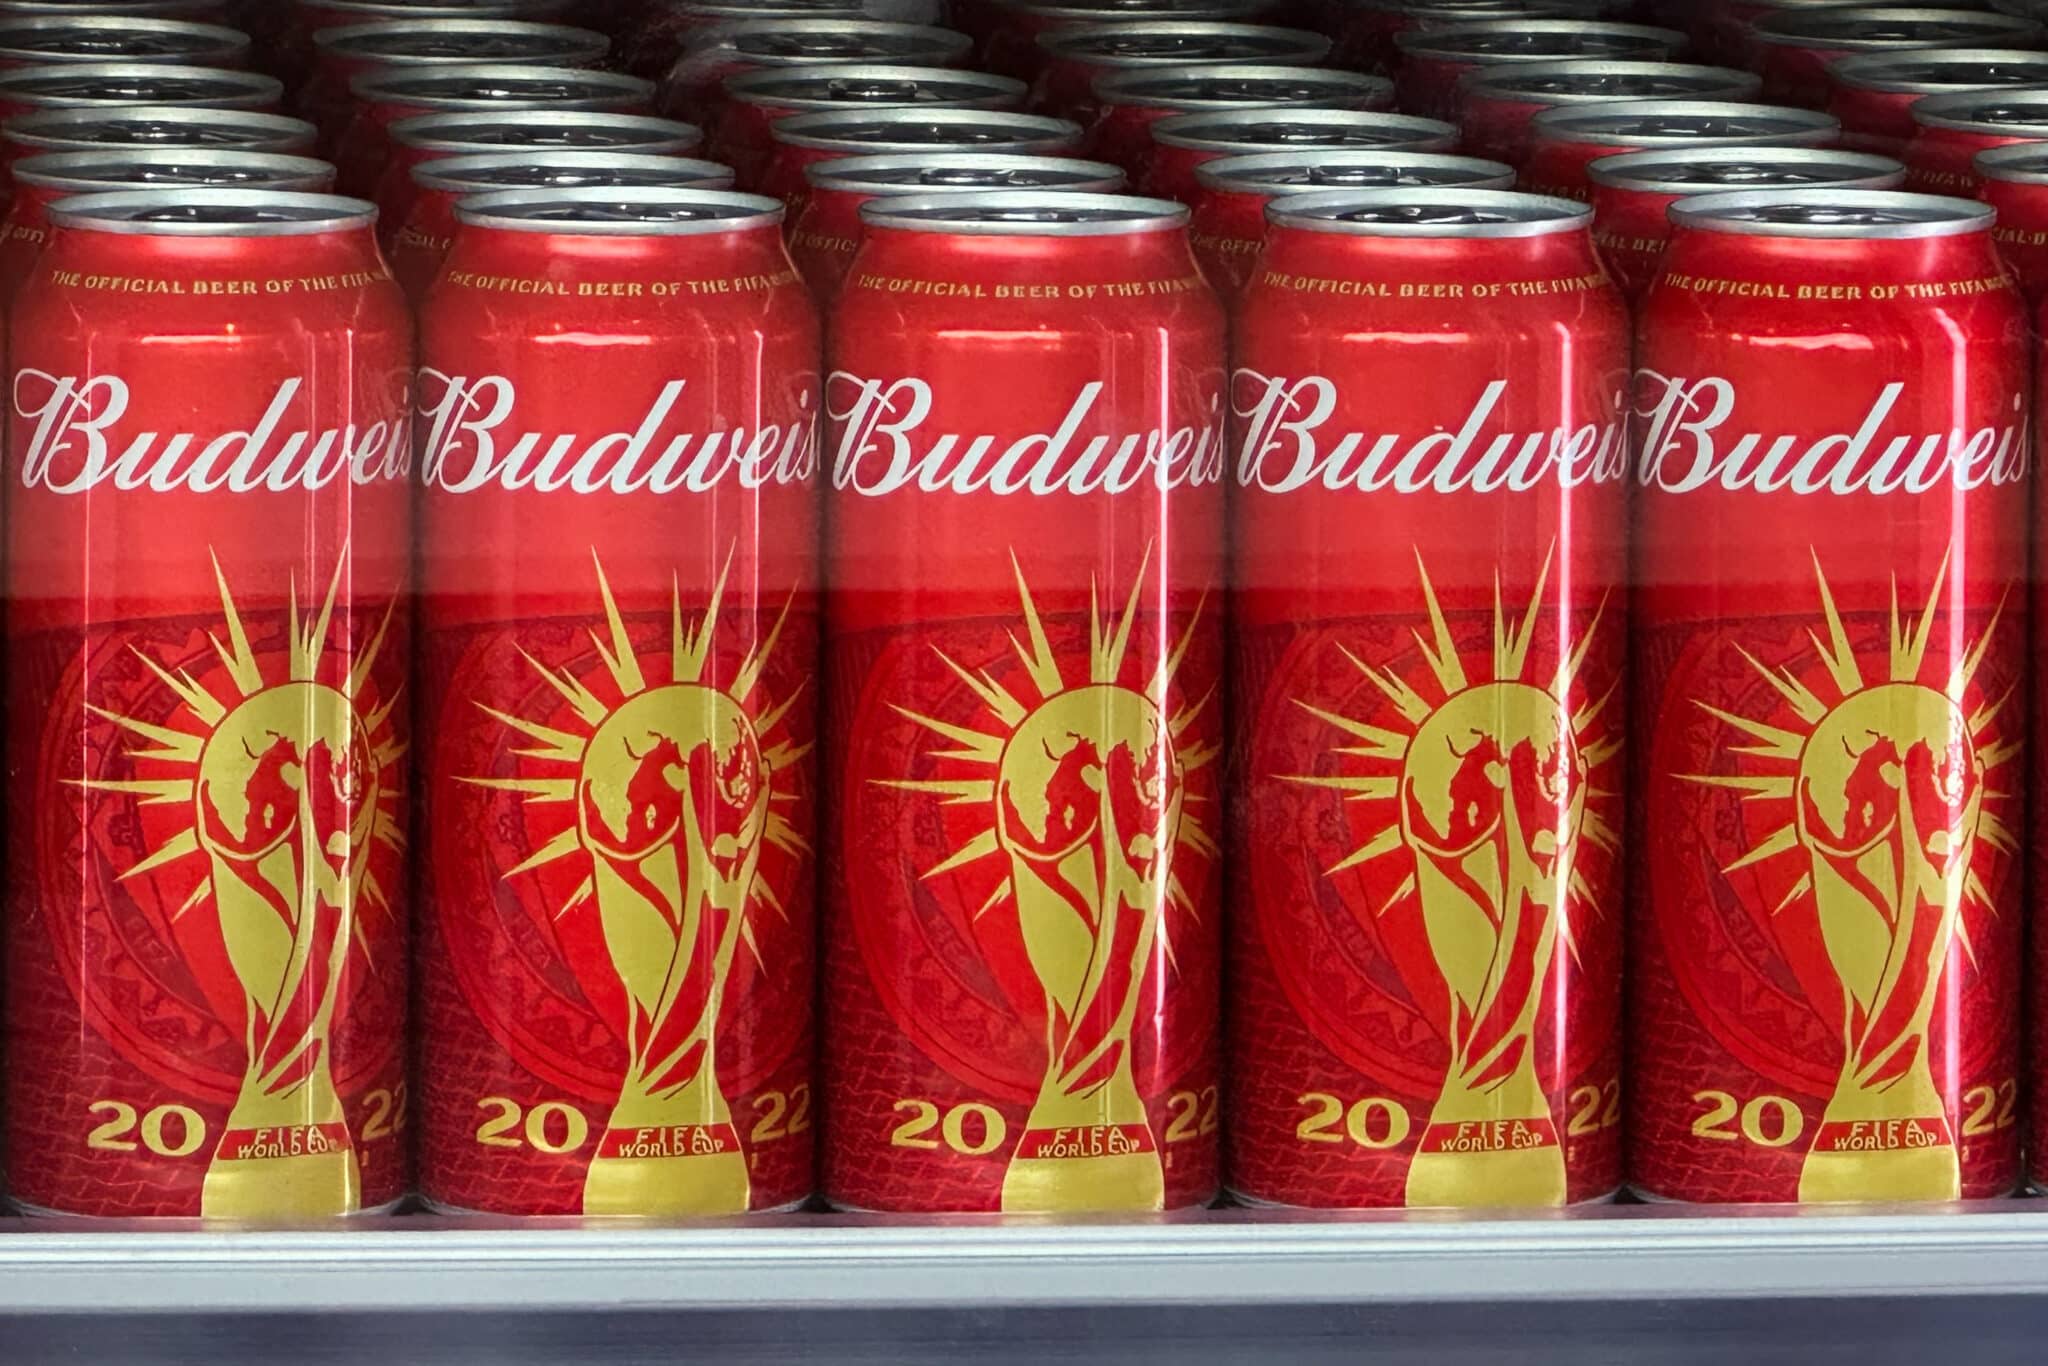 Cans of Budweiser beer featuring the FIFA World Cup logo are displayed in Doha on November 18, 2022 ahead of the Qatar 2022 World Cup football tournament. - The sale of alcohol in Qatar is strictly regulated. (Photo by Patrick T. FALLON / AFP) (Photo by PATRICK T. FALLON/AFP via Getty Images)